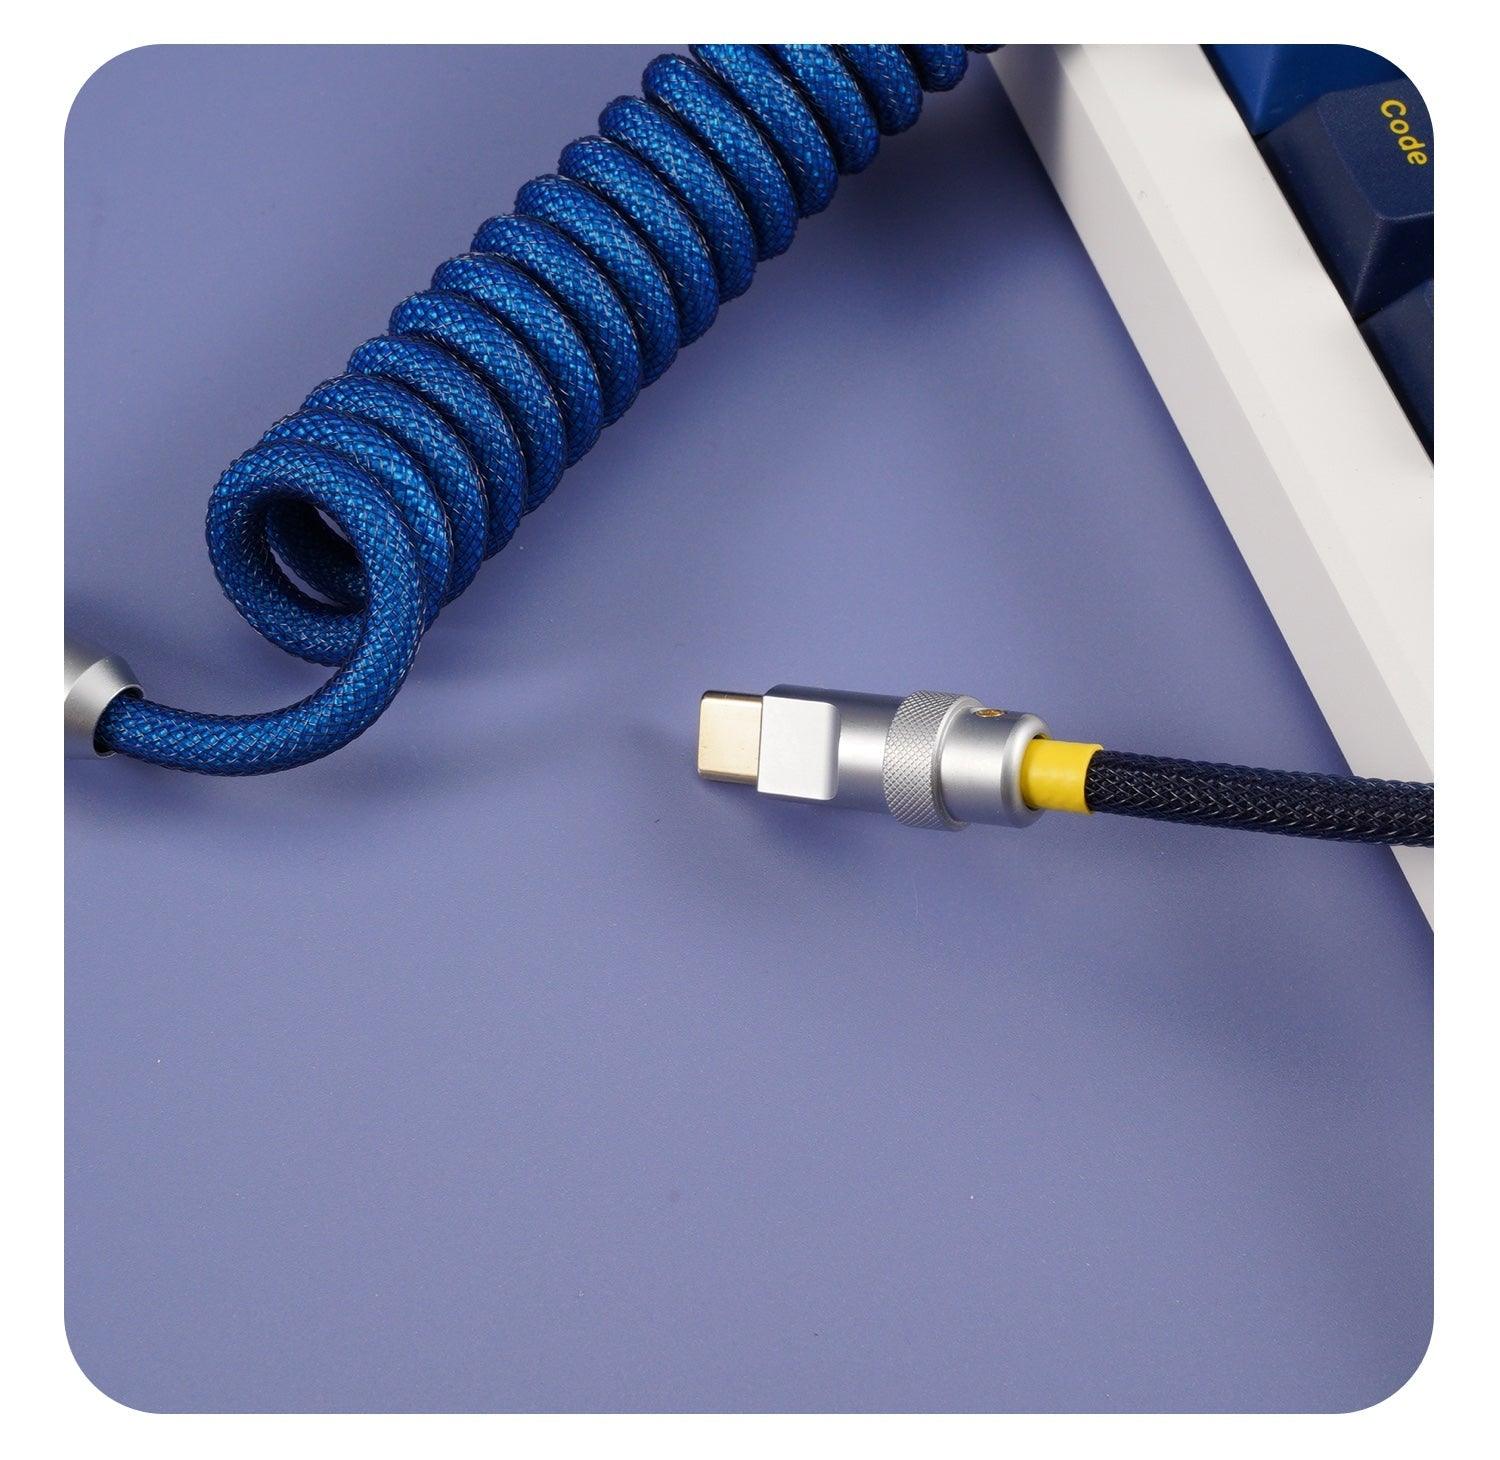 GeekCable Dark Blue Manual Customized Mechanical Keyboard Cable - IPOPULARSHOP